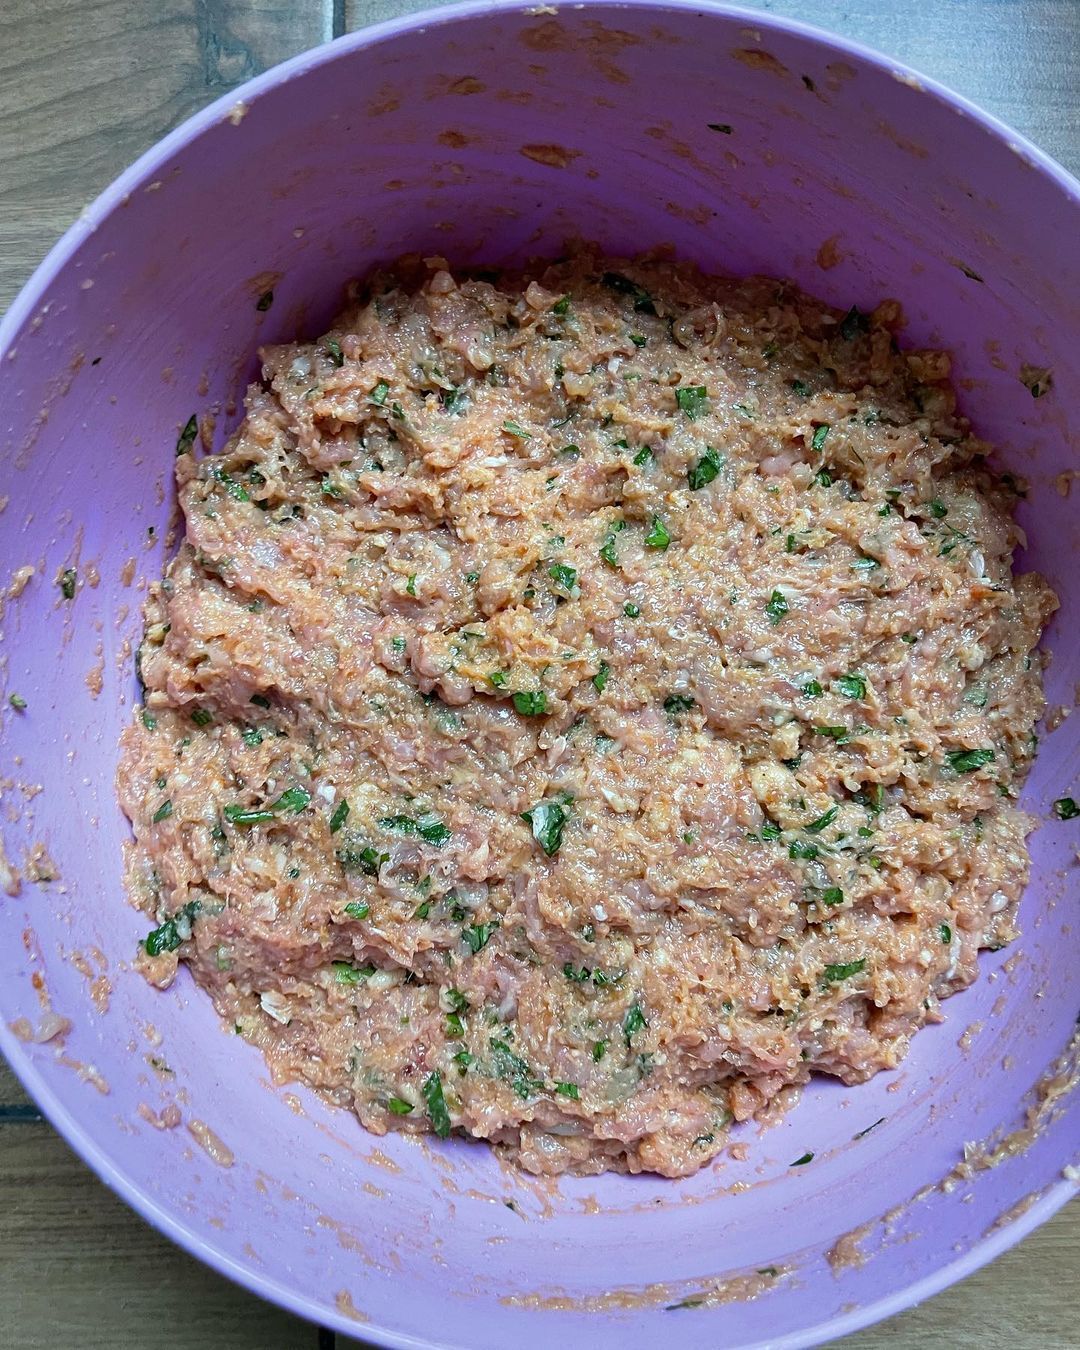 Prepared minced meat and onions